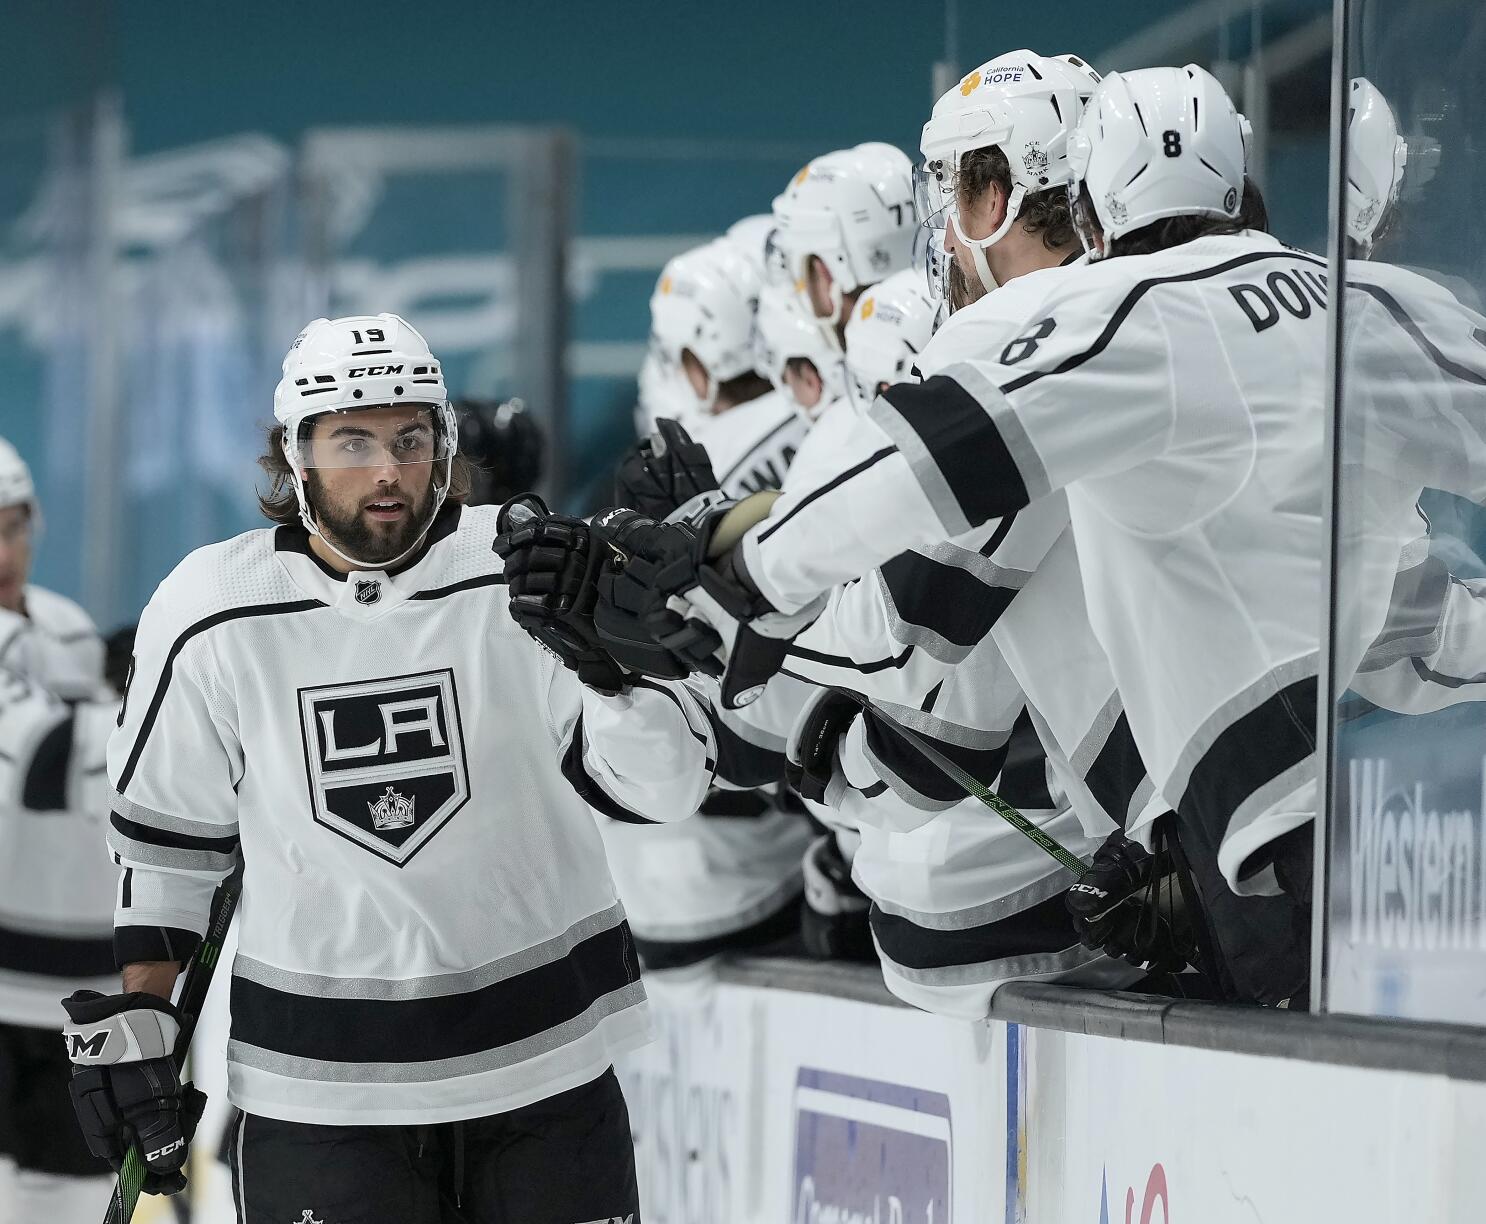 Video: LA Kings Goalie Kicked Out for Blocker Punches - NHL Trade Rumors 